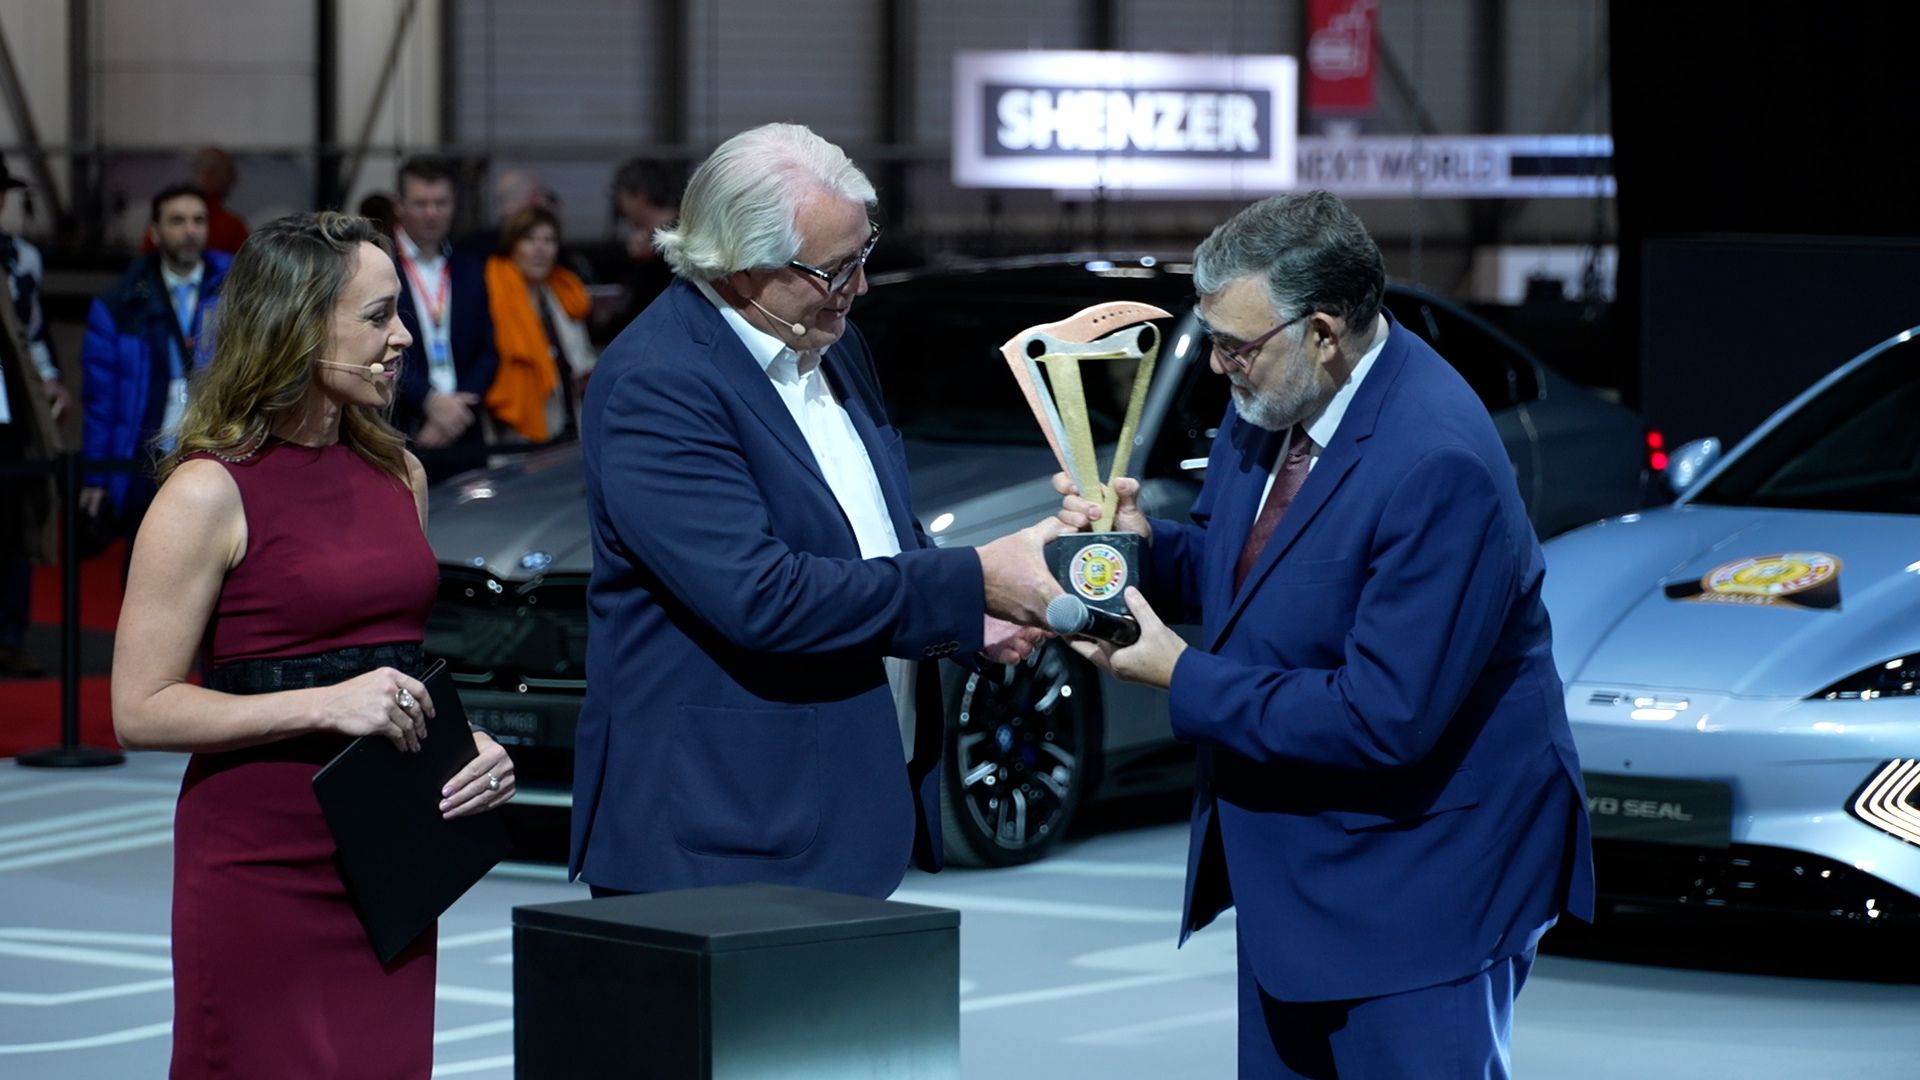 Renault's chief technology officer Gilles Le Borgne receives the Car of the Year award. /CGTN/Medienwerk